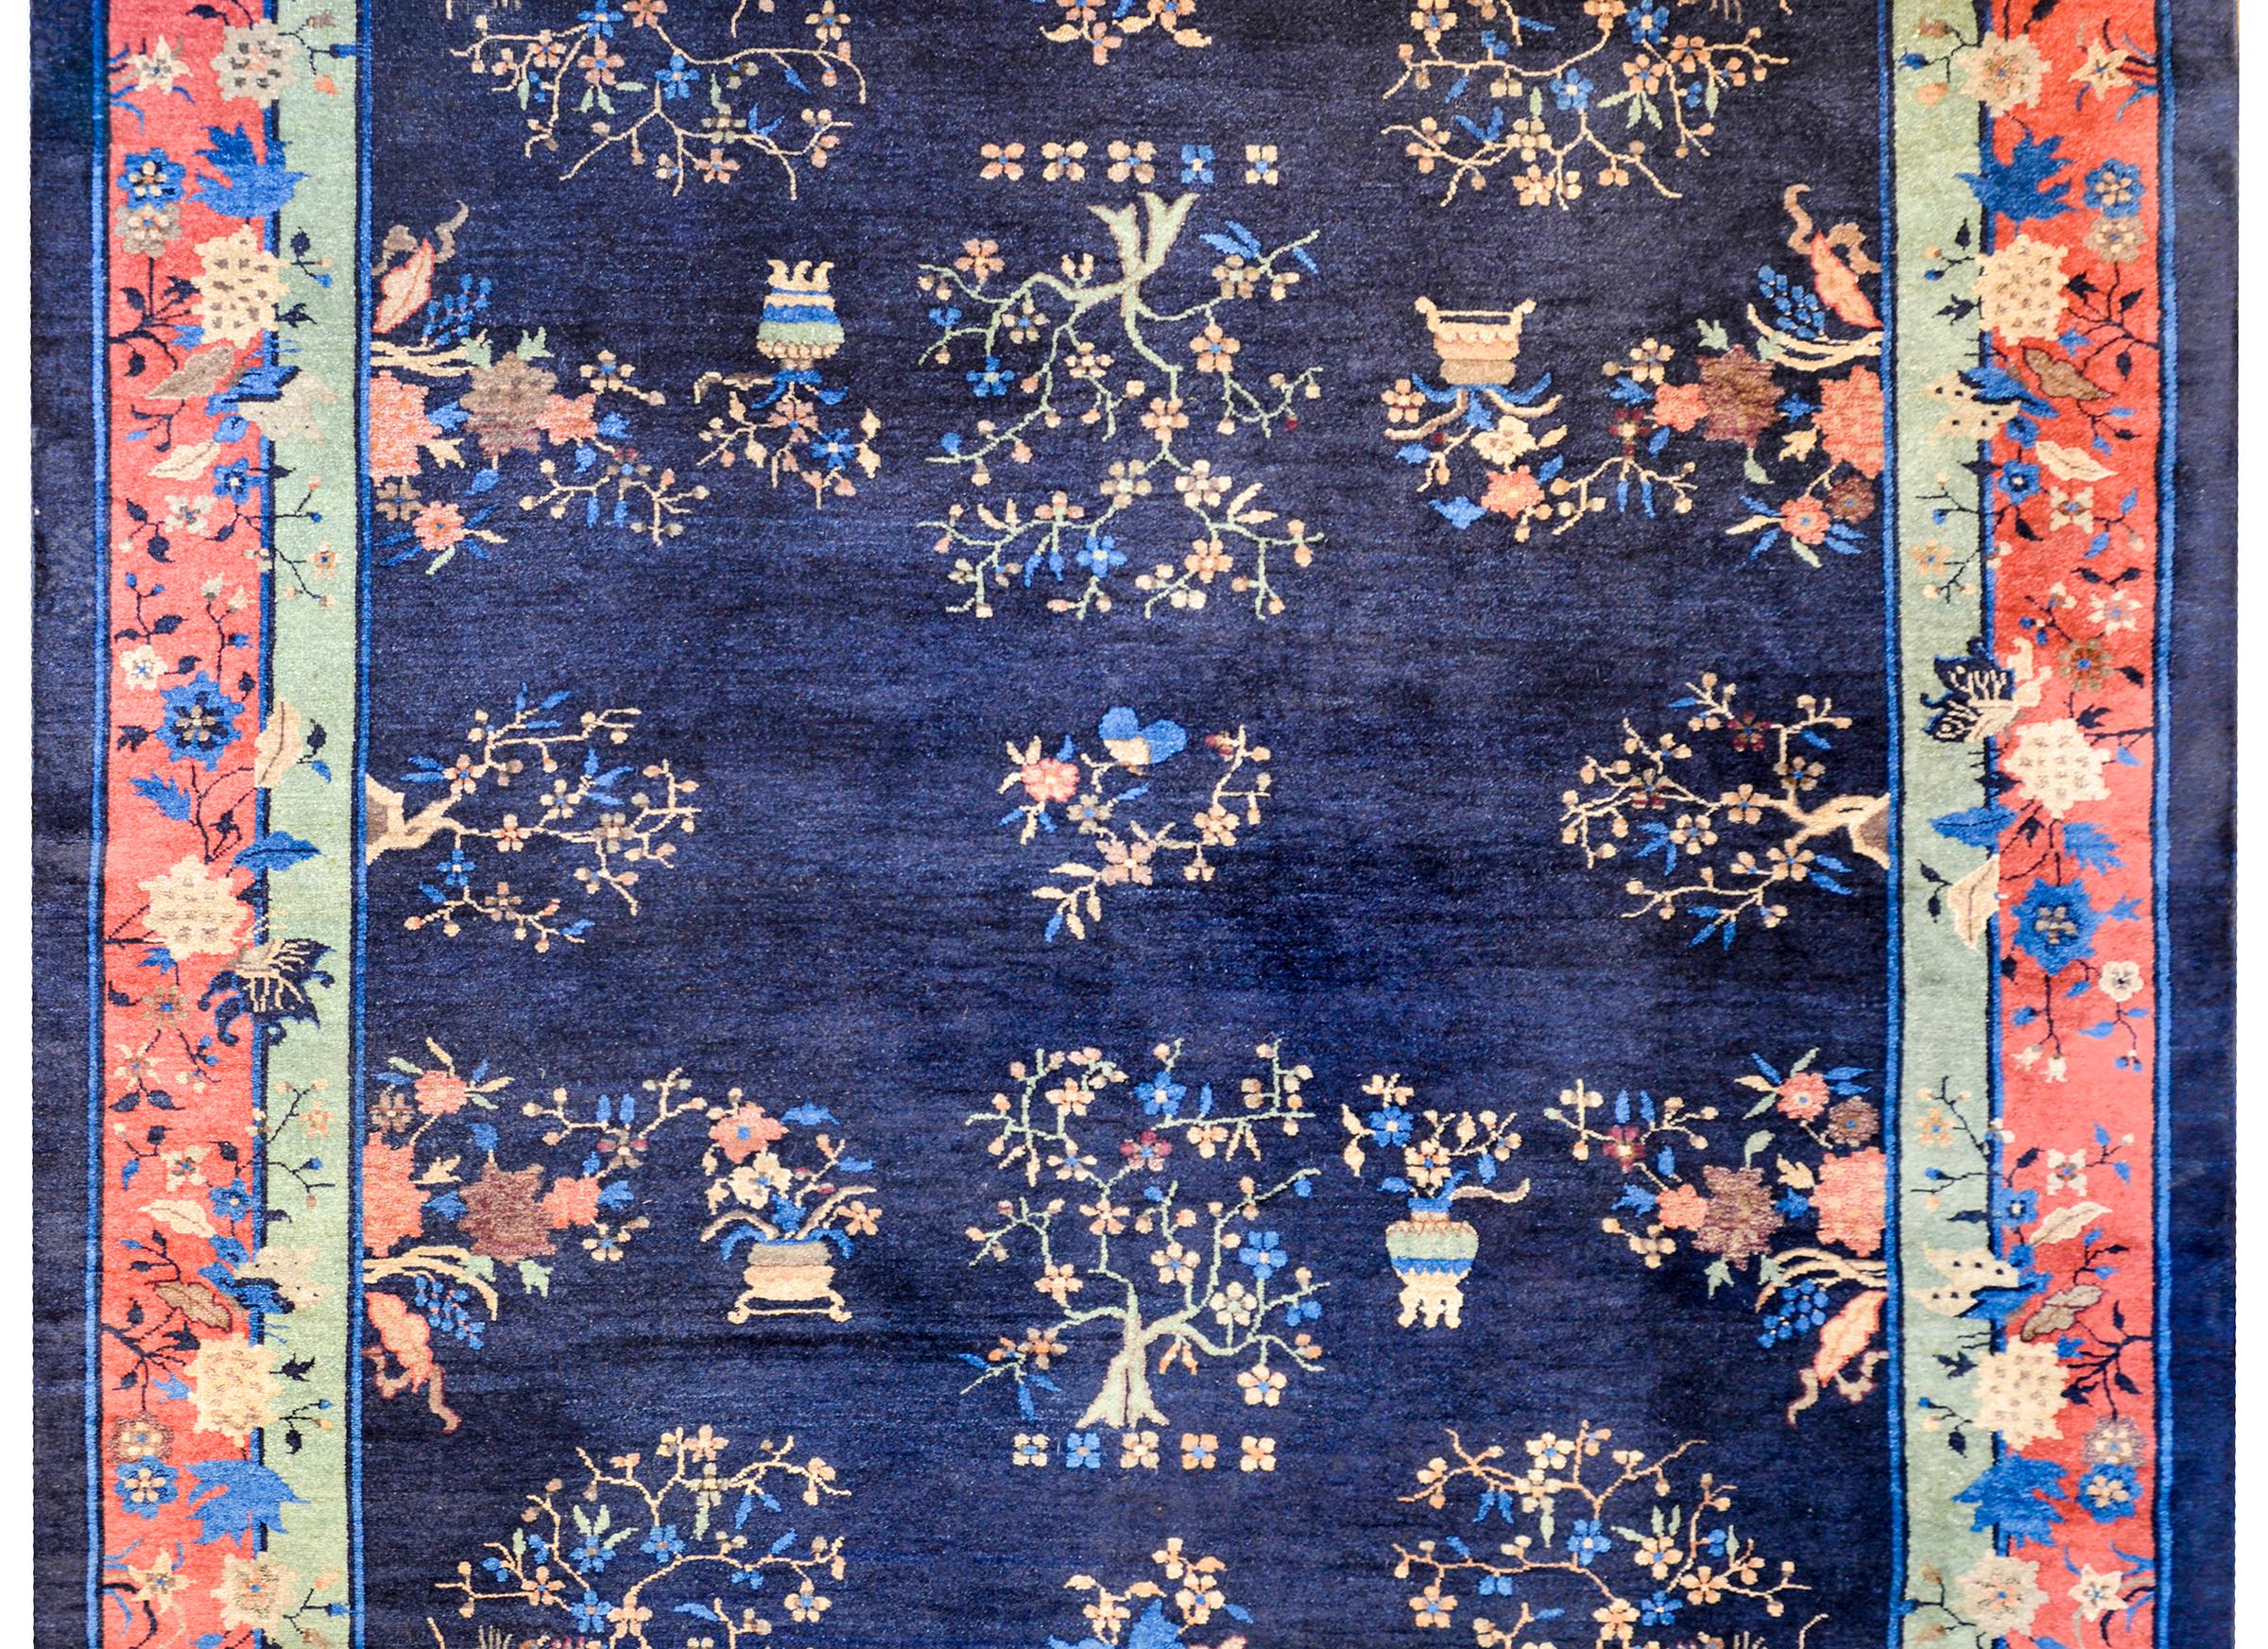 An unusual early 20th century Chinese Art Deco rug with an all-over patters of multicolored flowering trees and pots planted with peonies and other auspicious flowers, all on a dark indigo background. The border is complex with dark and light